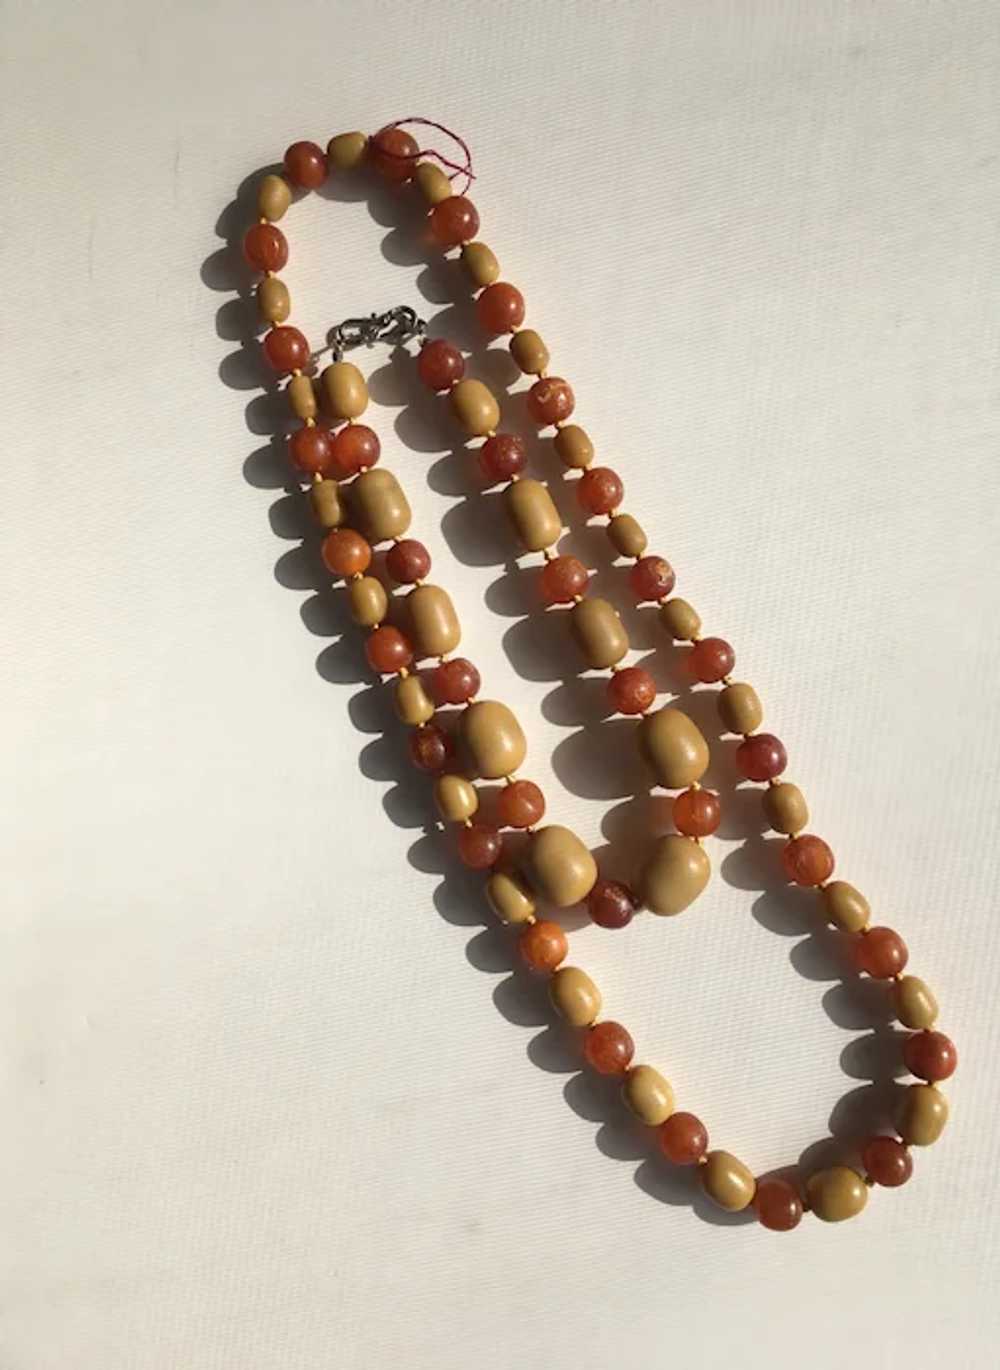 Two Amber Necklaces, Unpolished Oval & Round Beads - image 7